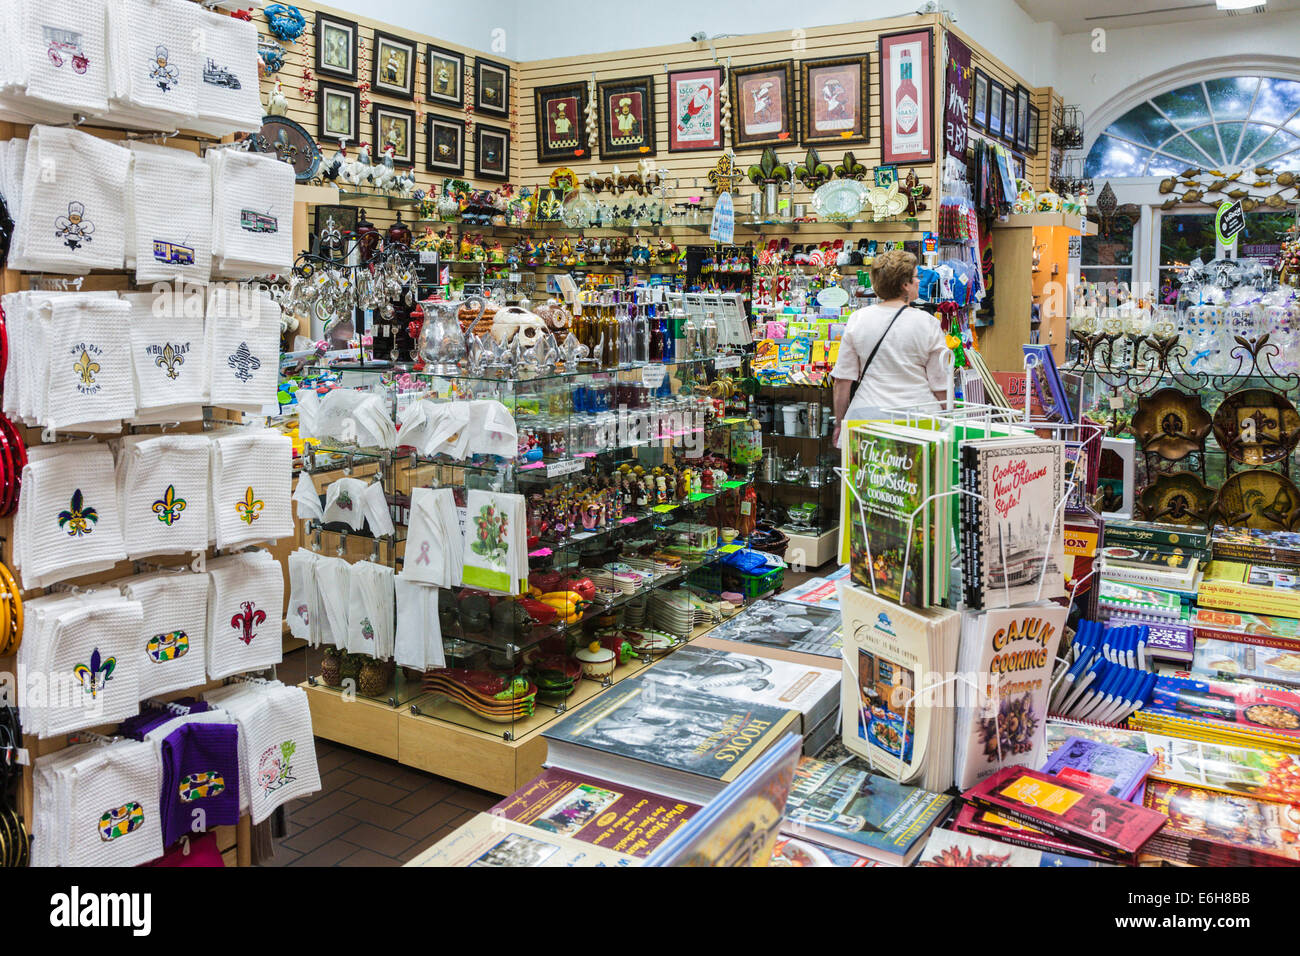 Interior of gift shop in the French Quarter of New Orleans, Louisiana Stock Photo